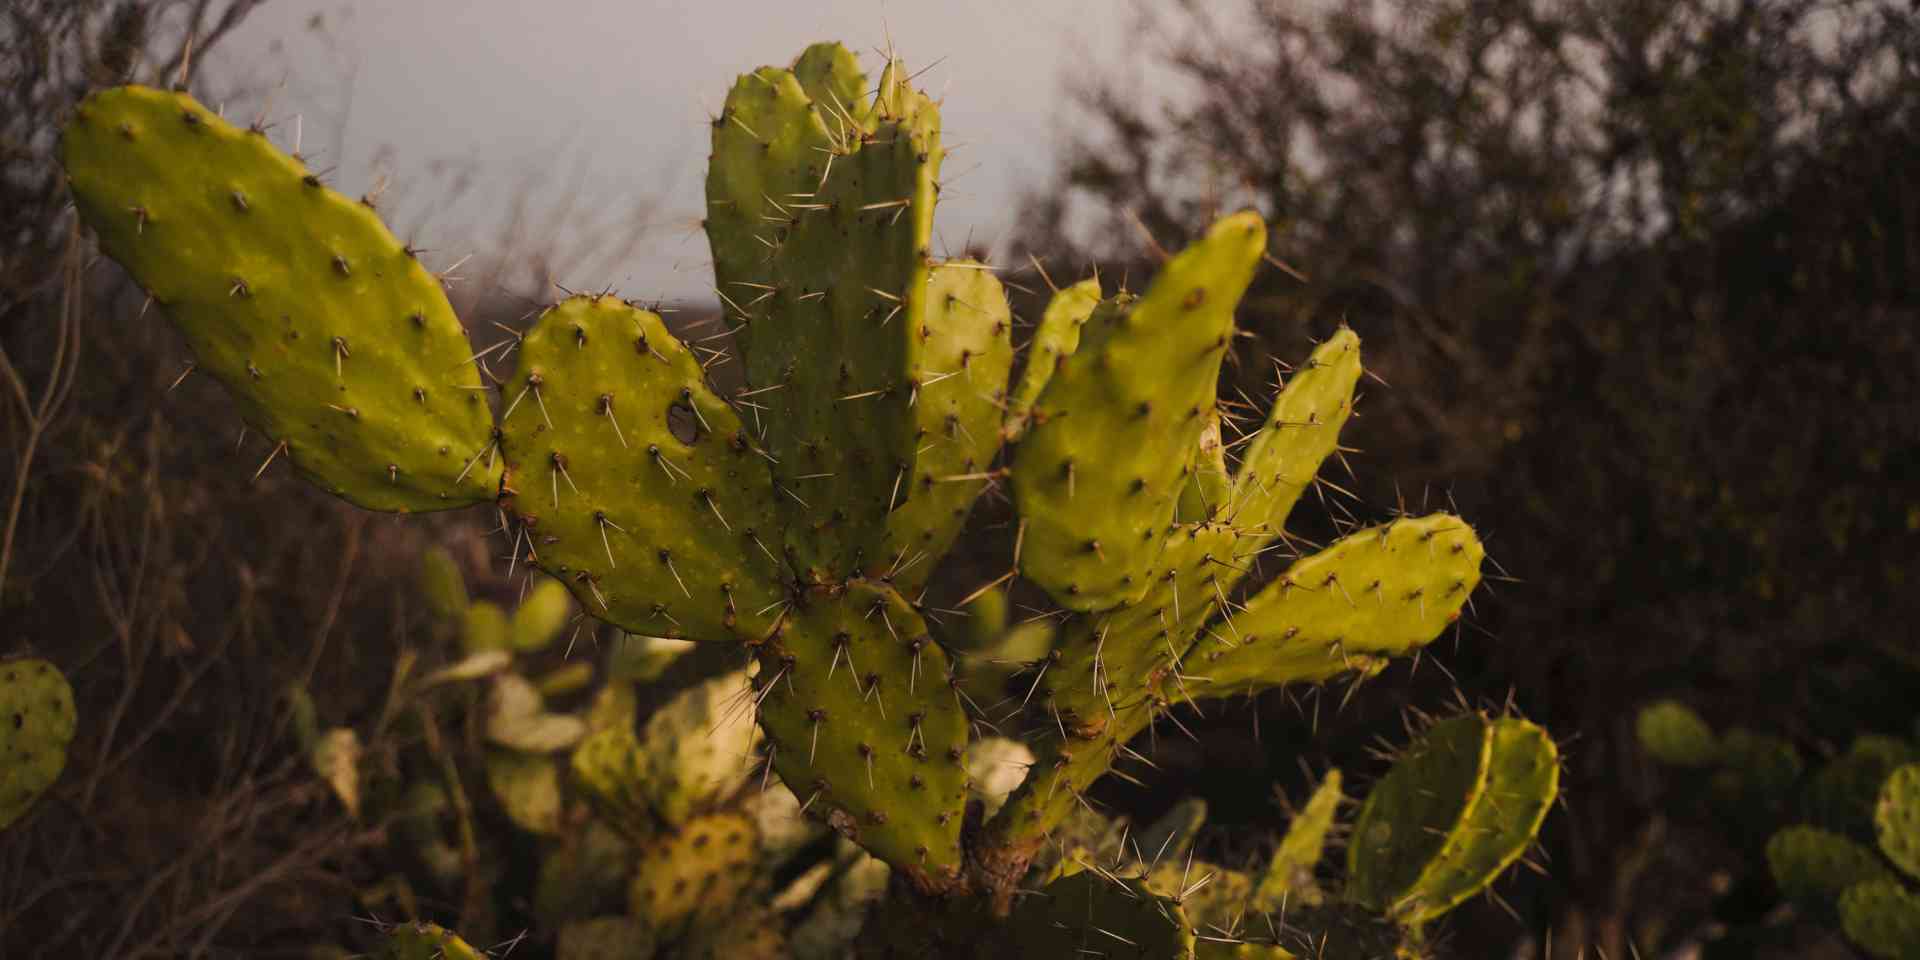 ITOCO launches its Nopal Cactus Carbon Capture program in Portugal - diego-lozano-Xobsjrz0J78-unsplash